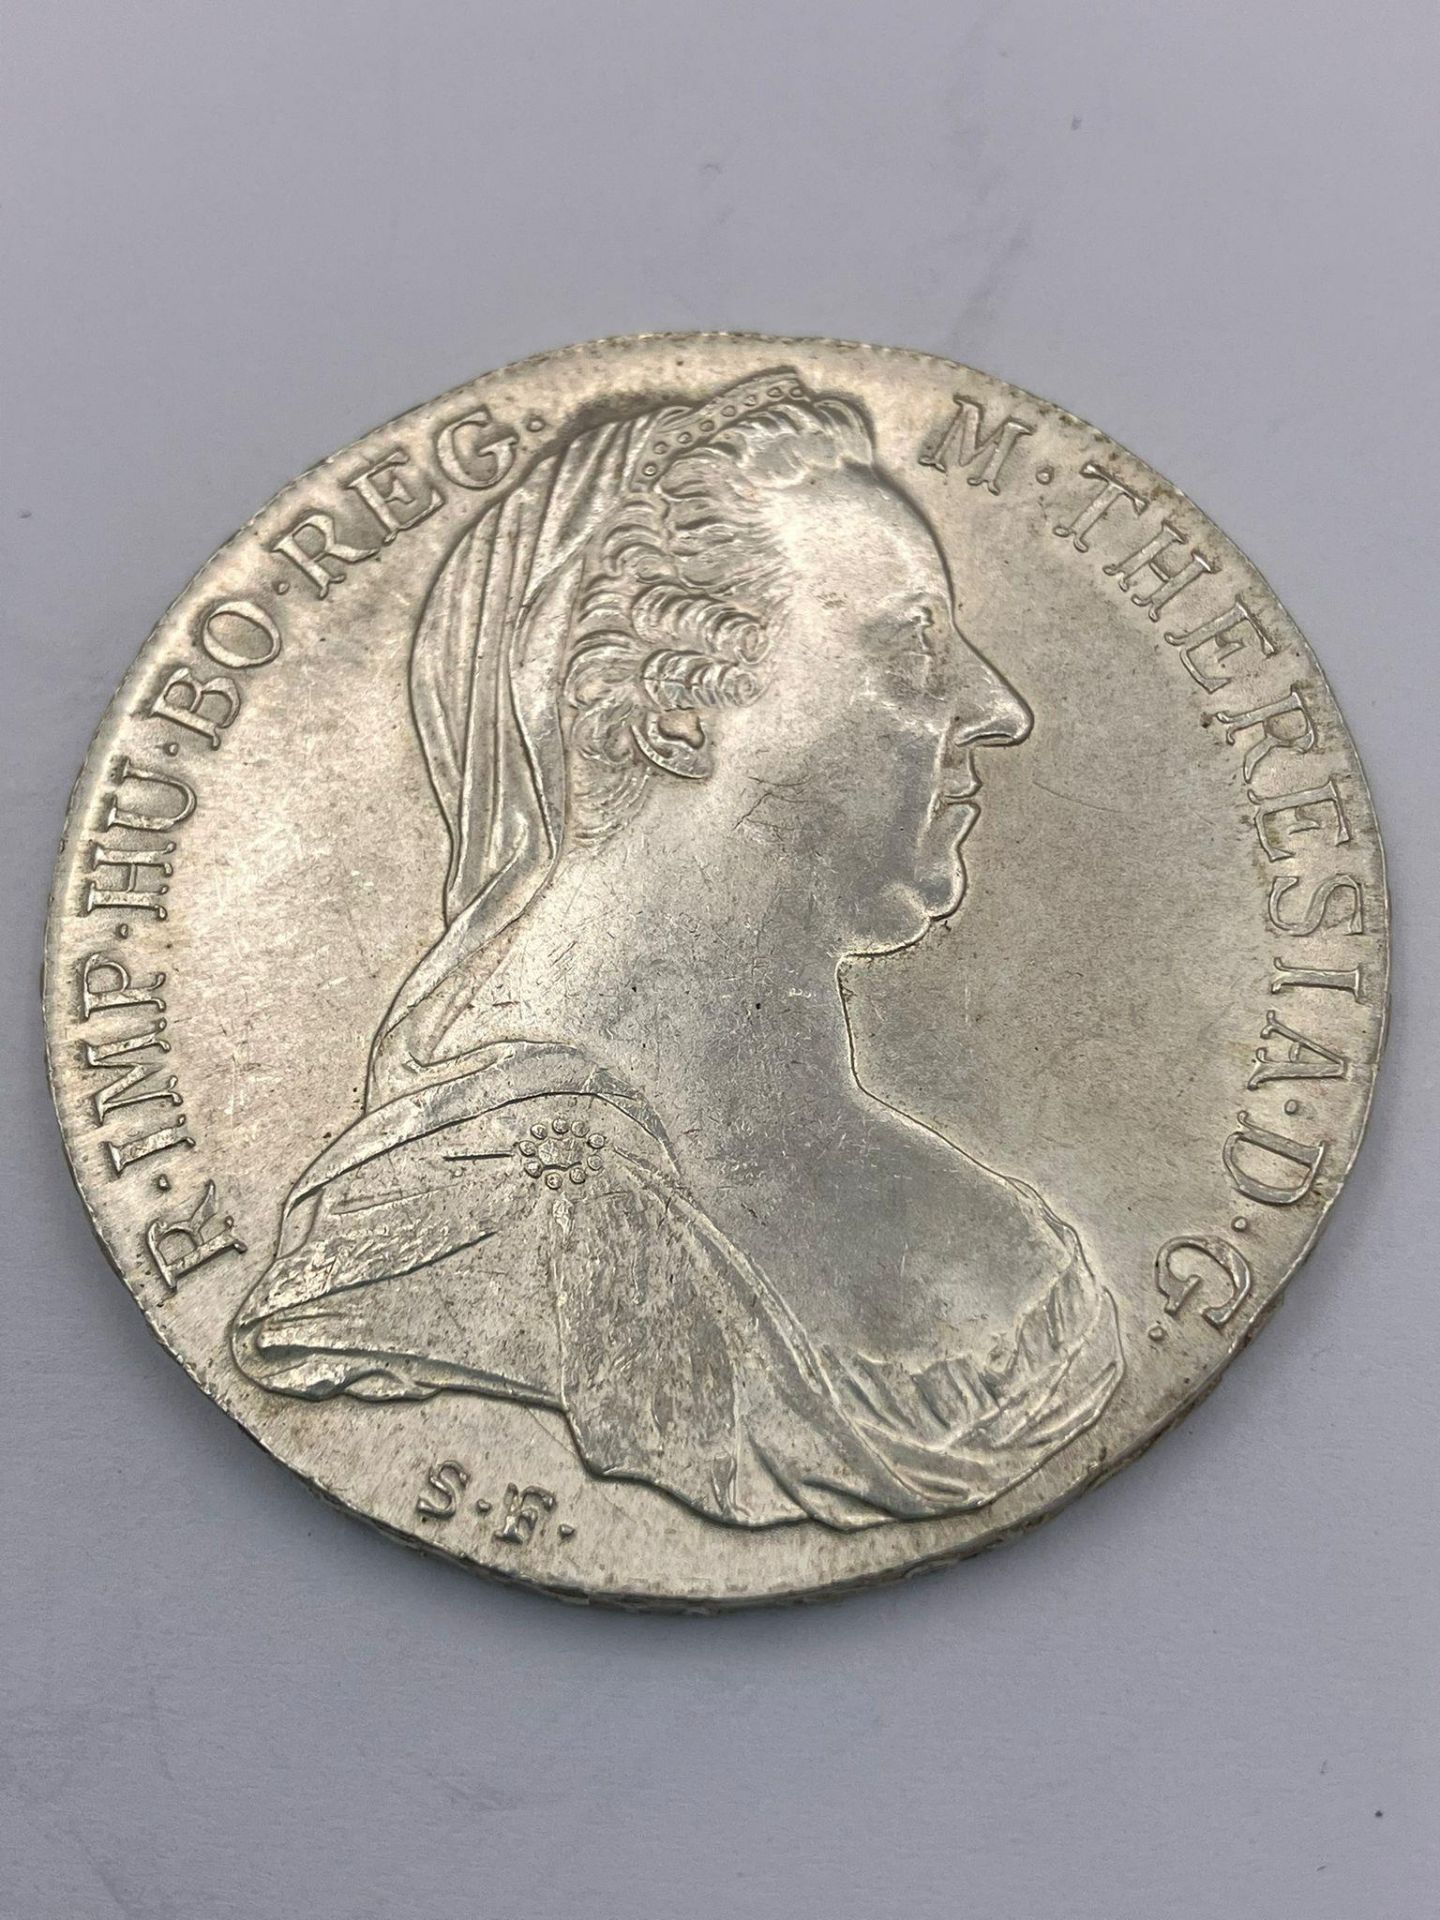 1780 SILVER MARIE THERESA THALER COIN. Brilliant/uncirculated condition.